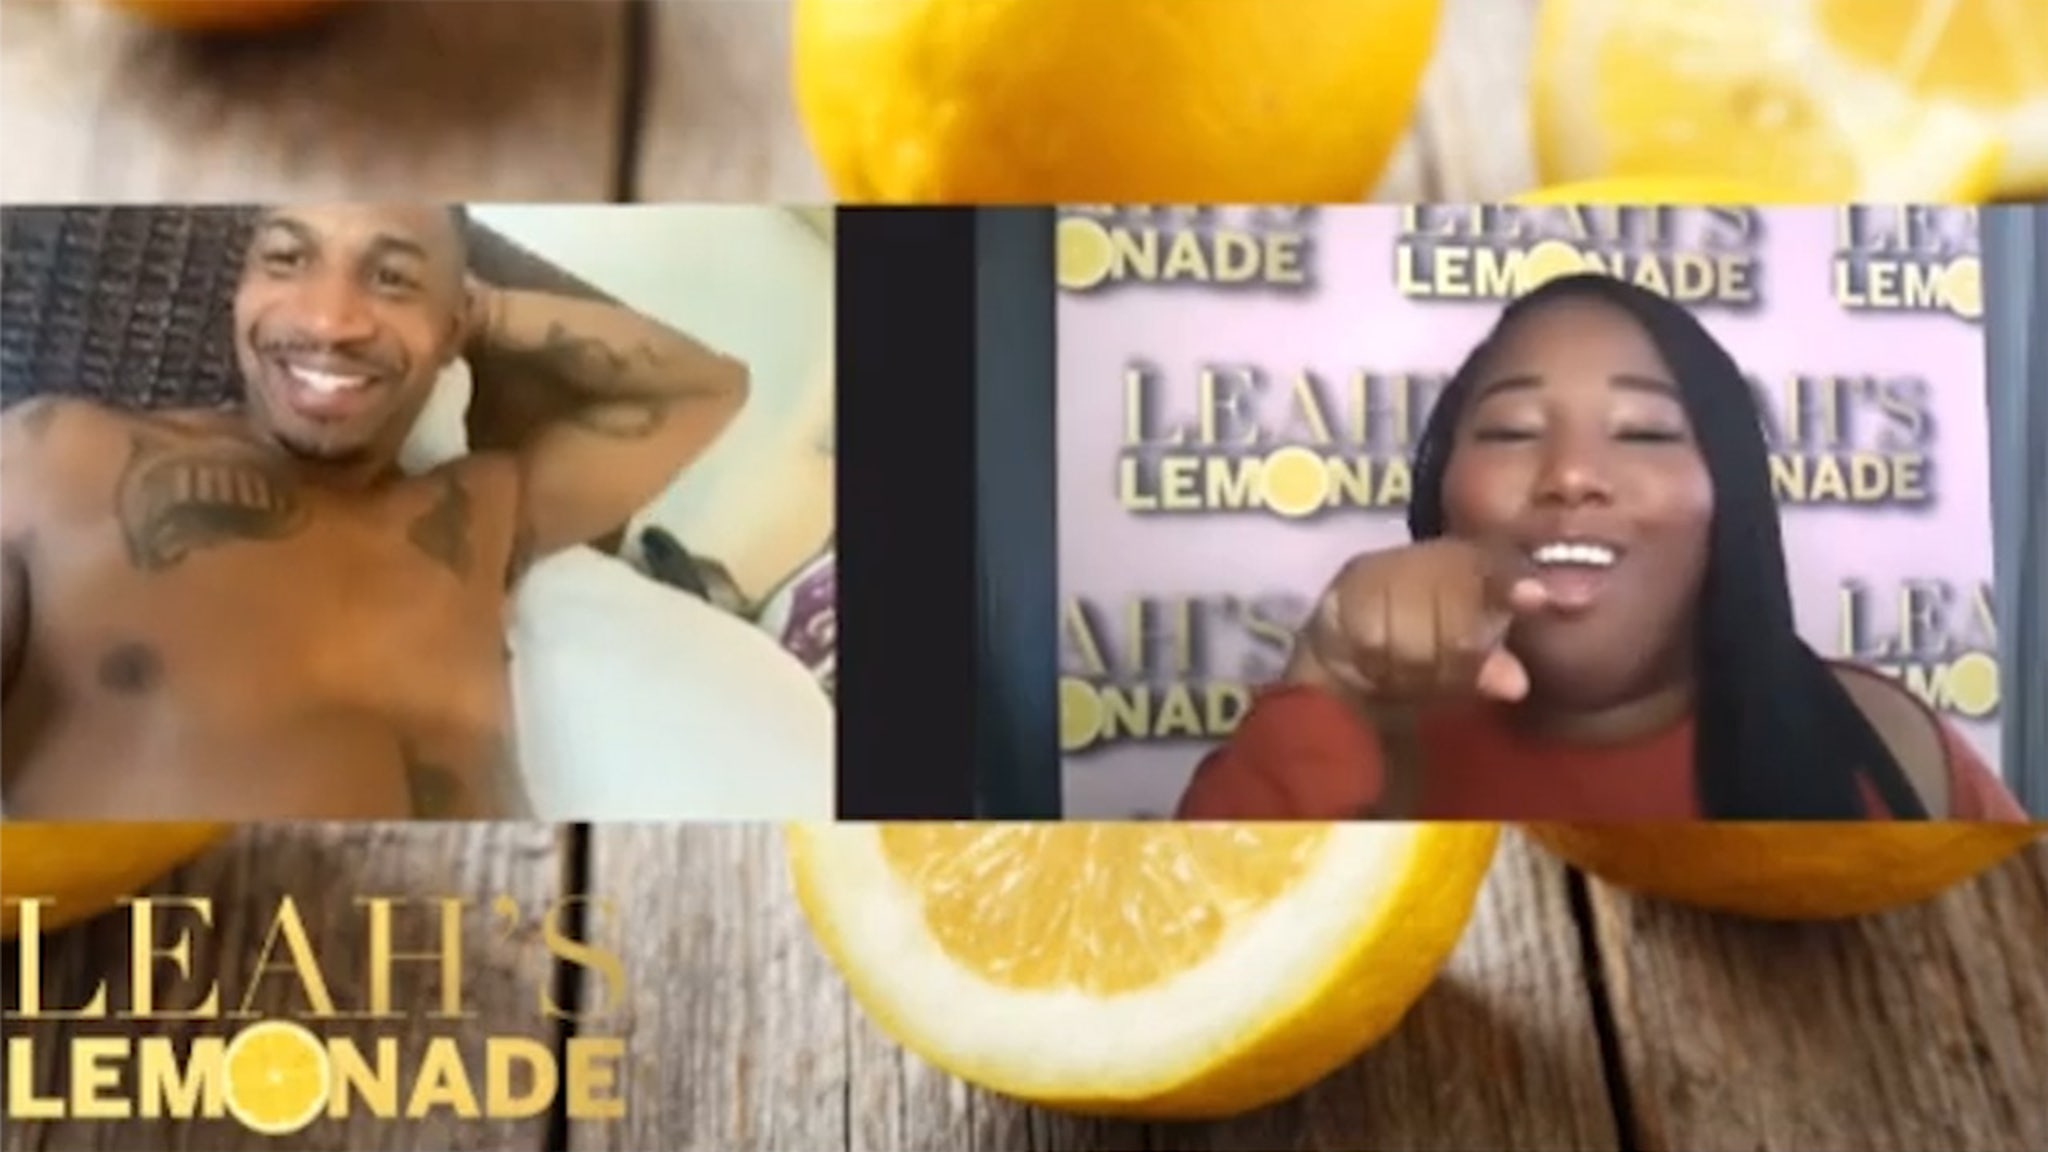 Stevie J Appears To Be Receiving Oral Sex During FaceTime Interview